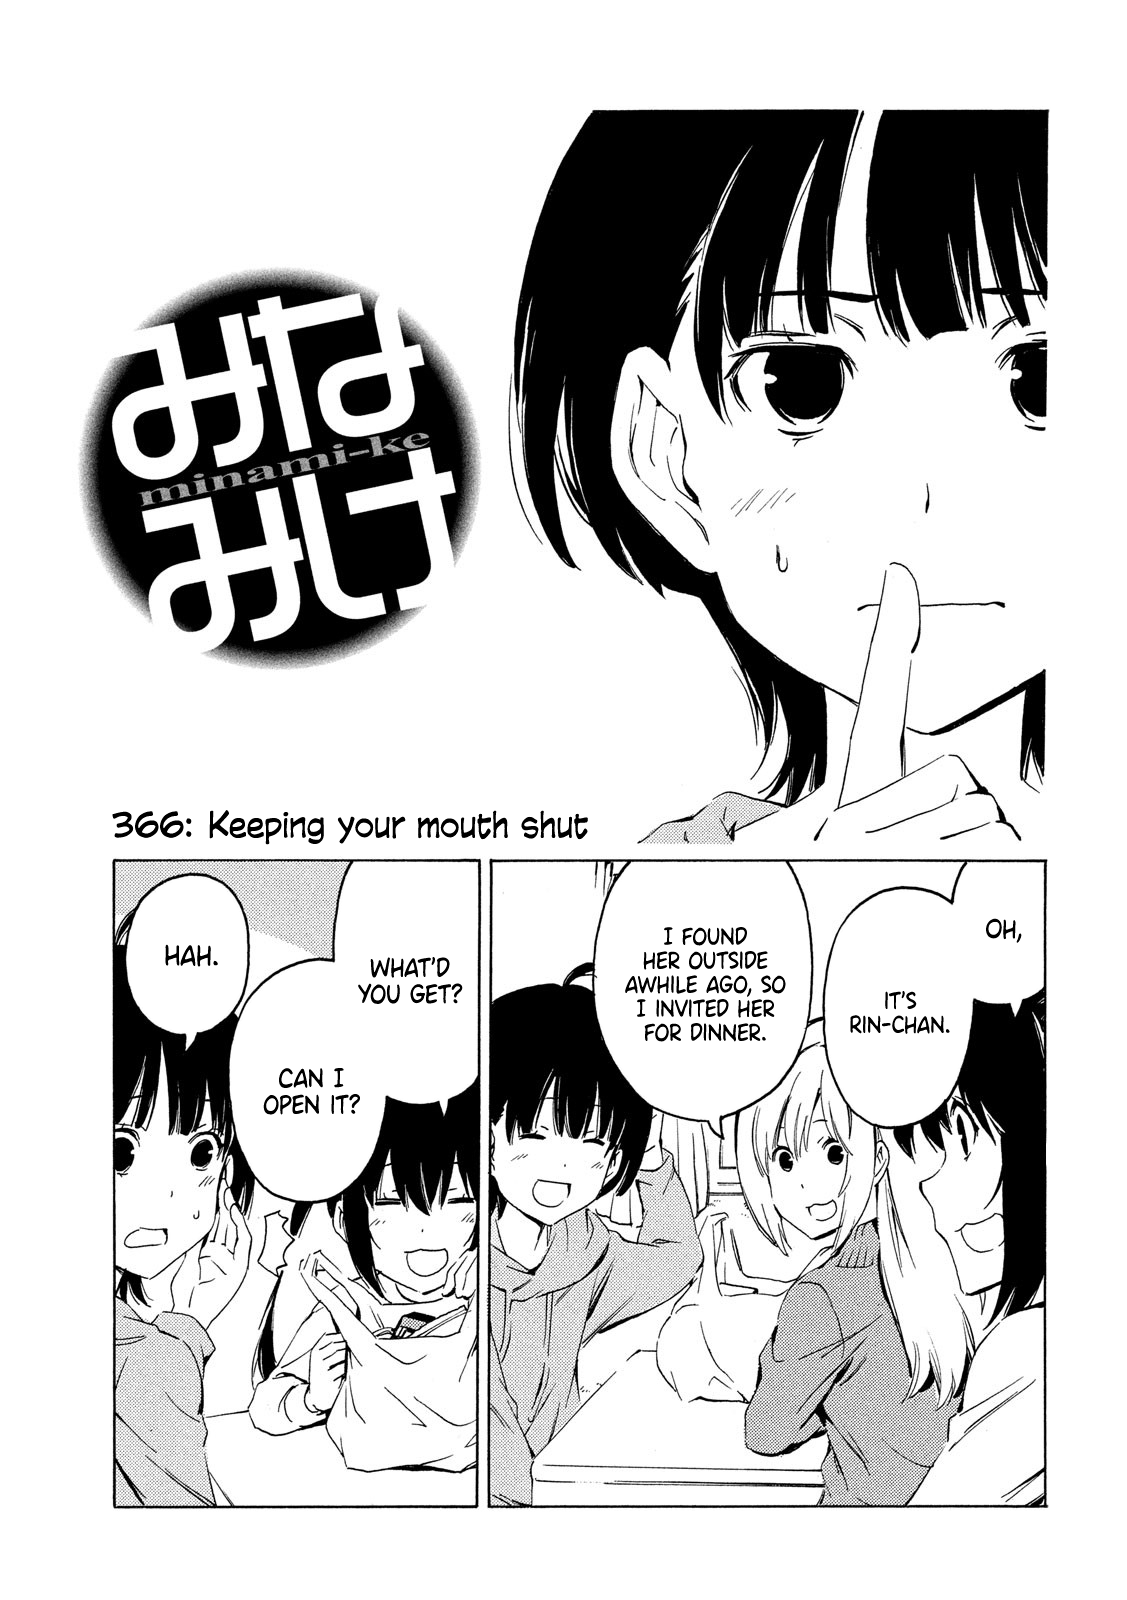 Minami-Ke Chapter 366: Keeping Your Mouth Shut - Picture 1